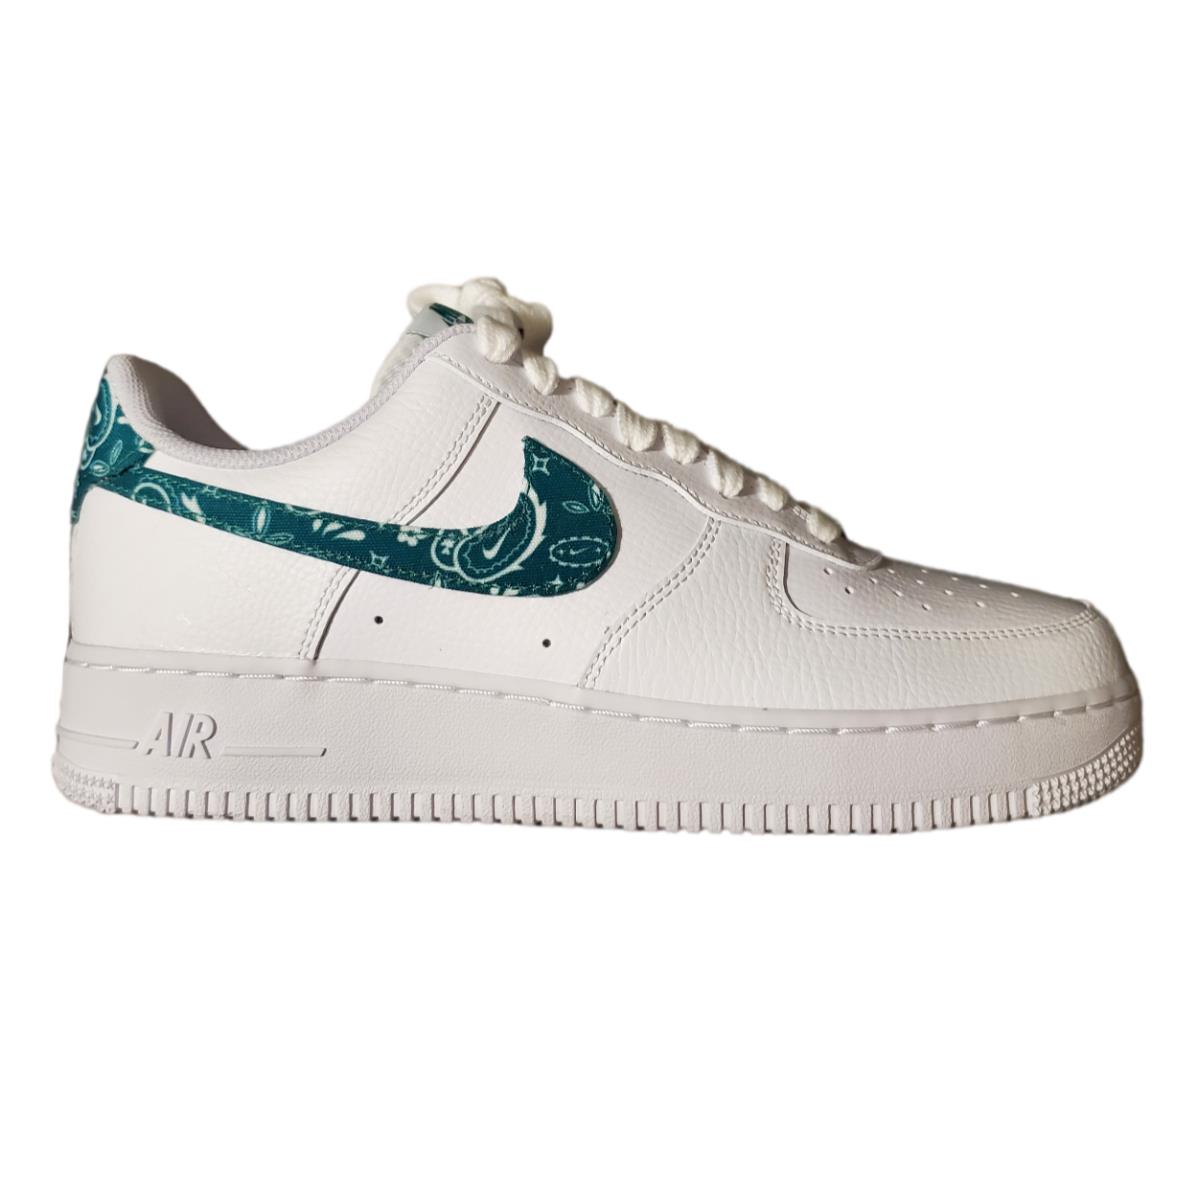 Nike Womens Air Force 1 Low 07 Ess Green Paisley Size 9.5 Casual Shoe DH4406-102 - White